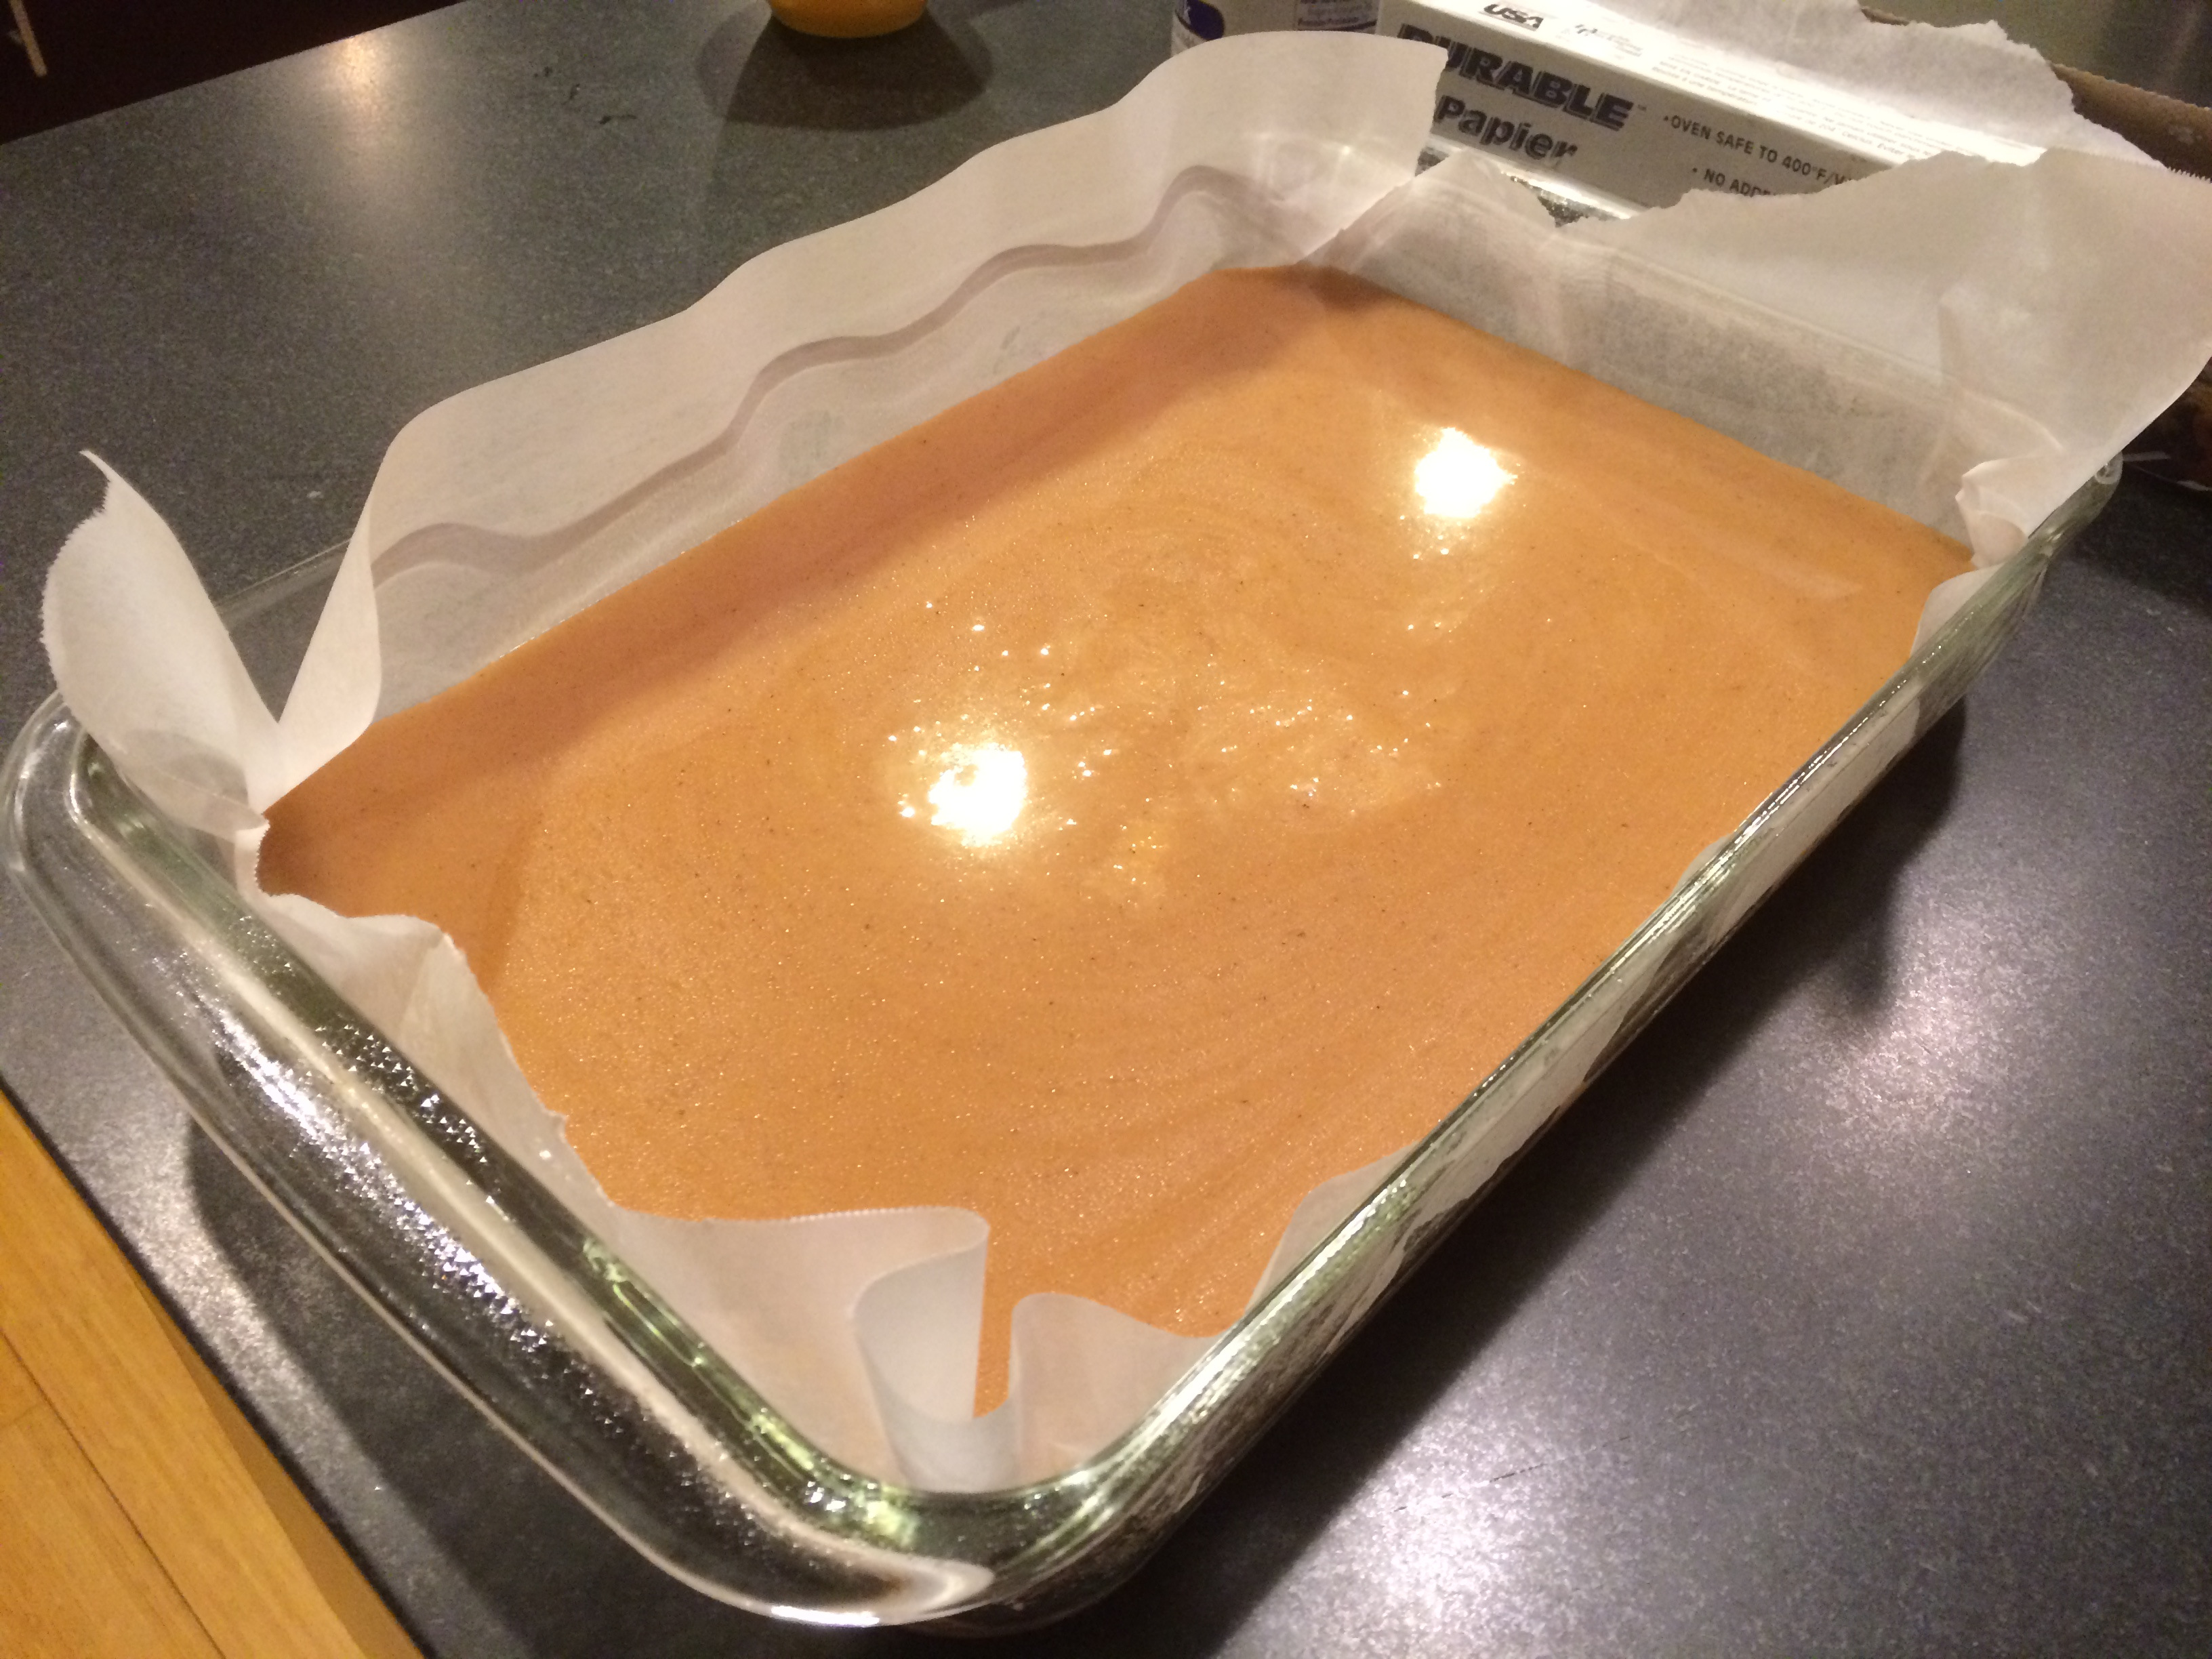 Caramel for Scotchmallows should look like this when done.